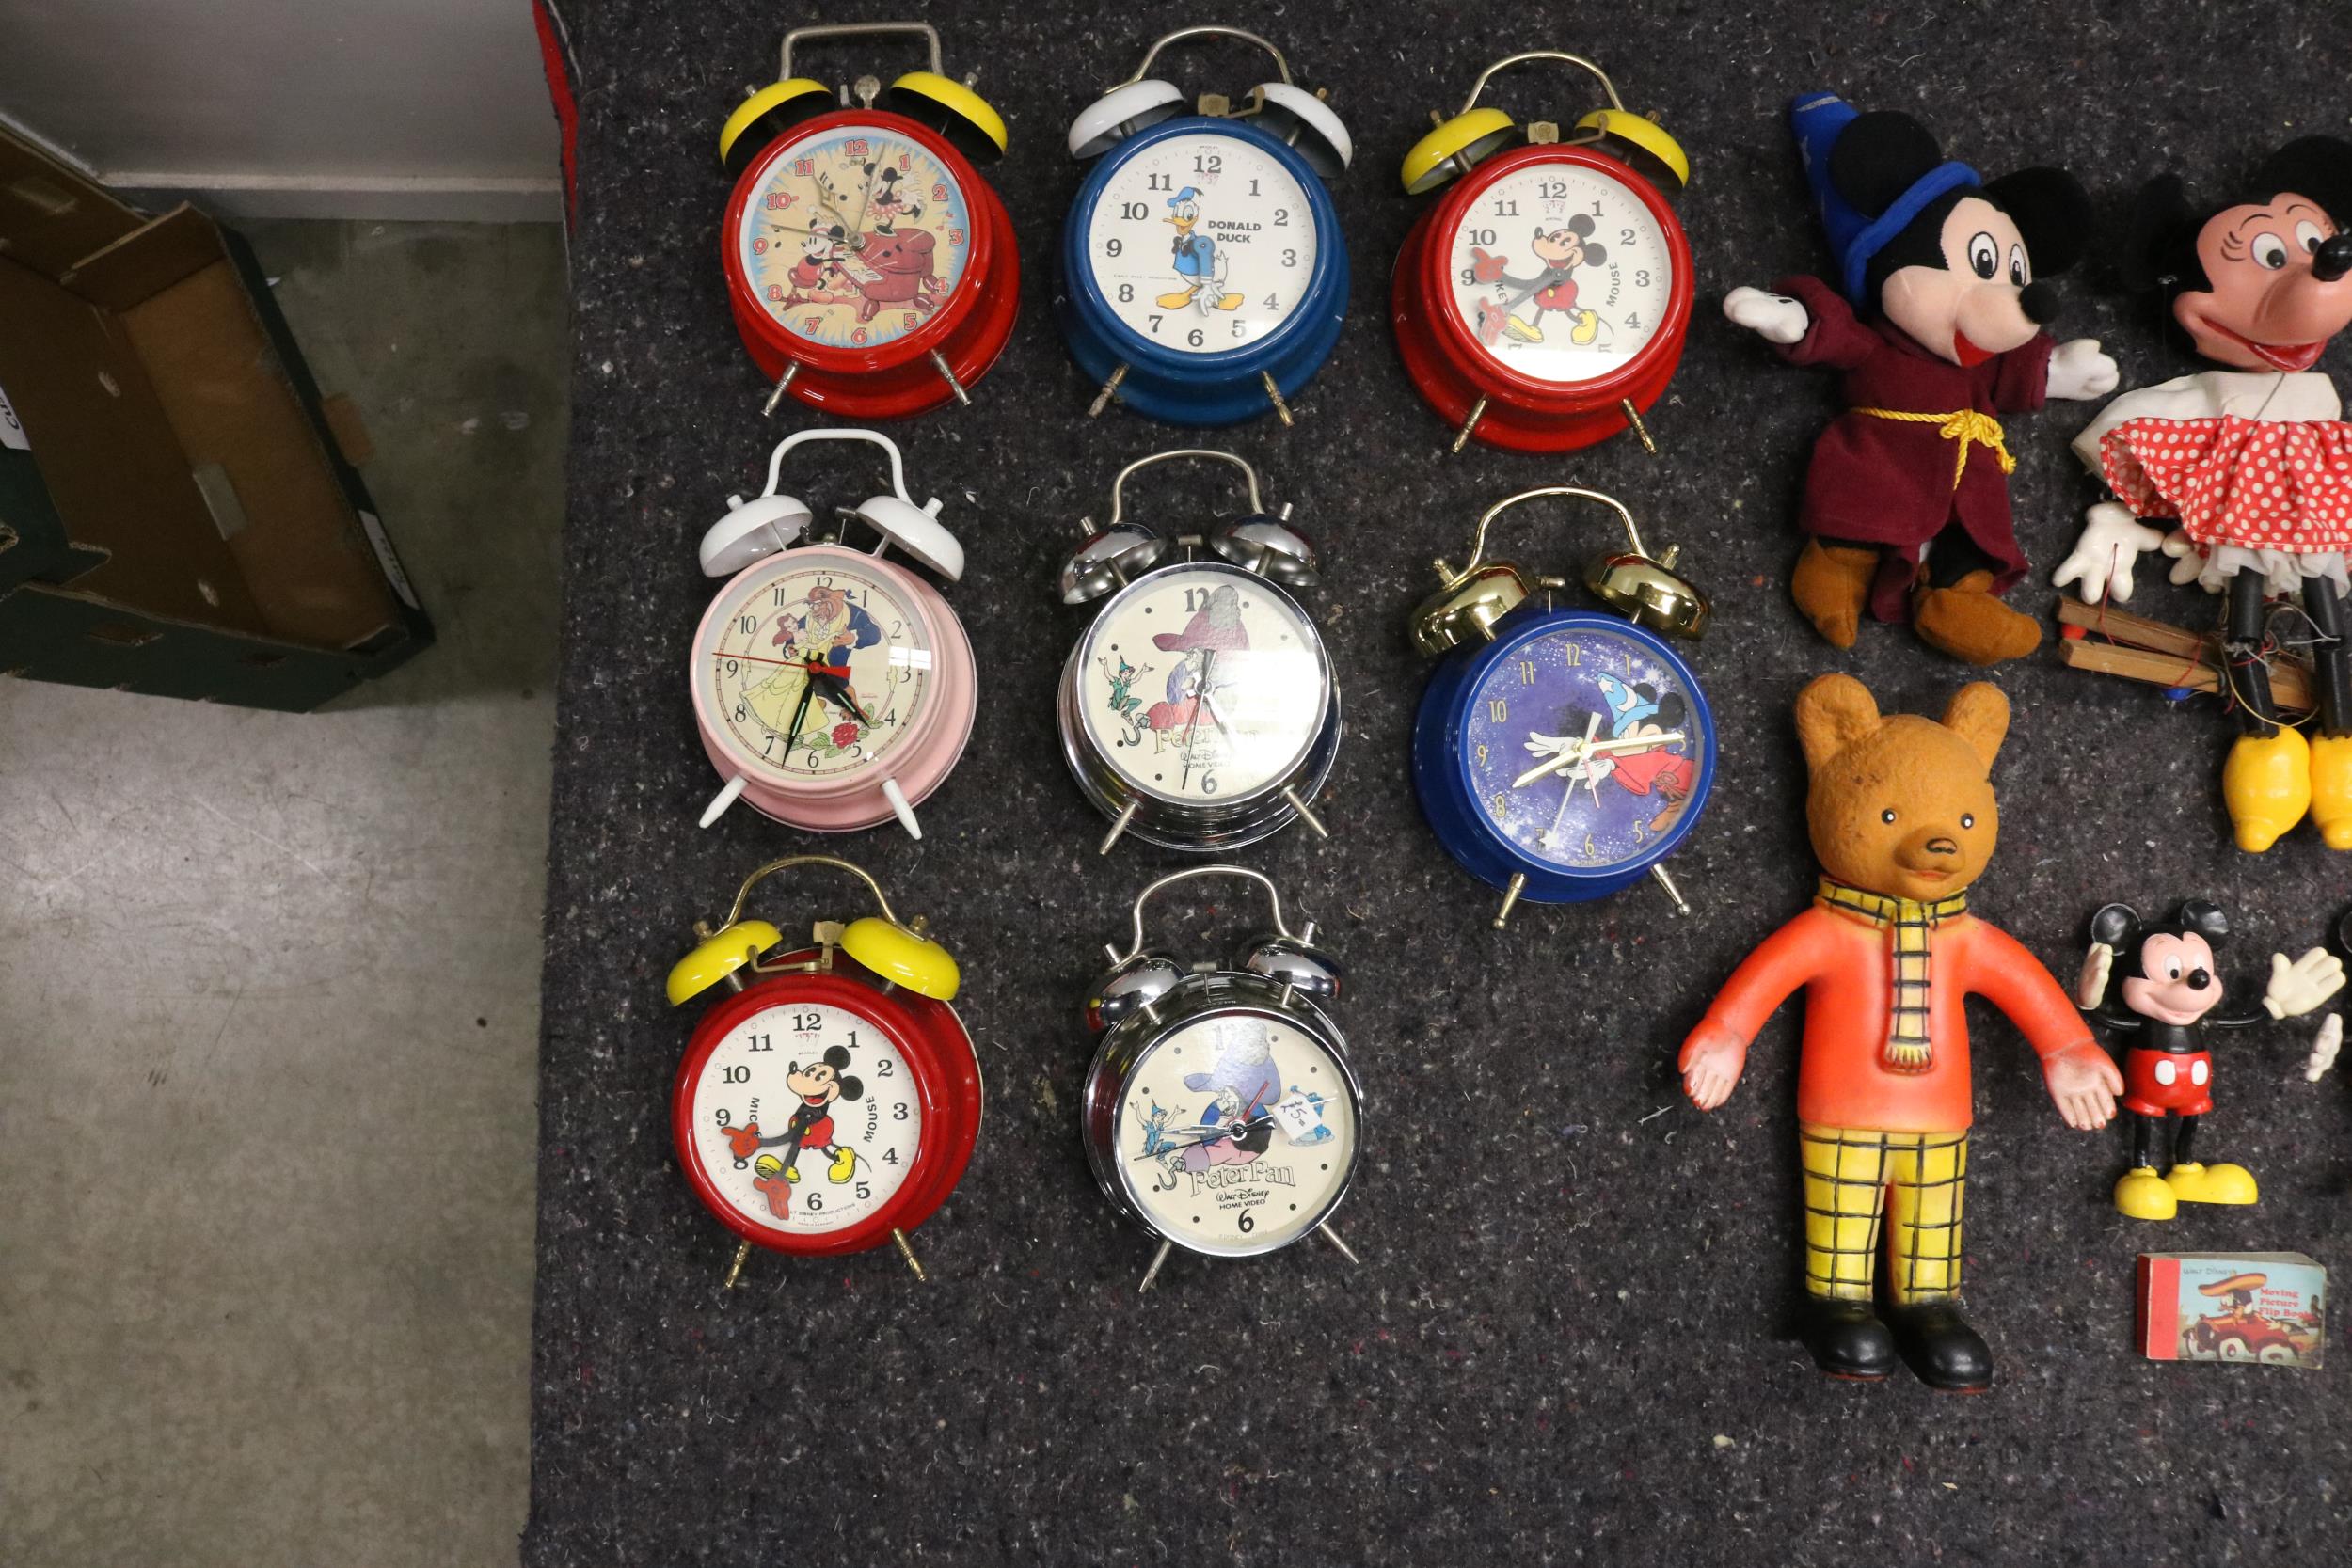 Large Collection Of Items Relating To Disney, Including 8 Vintage Alarm Clocks - Image 2 of 5